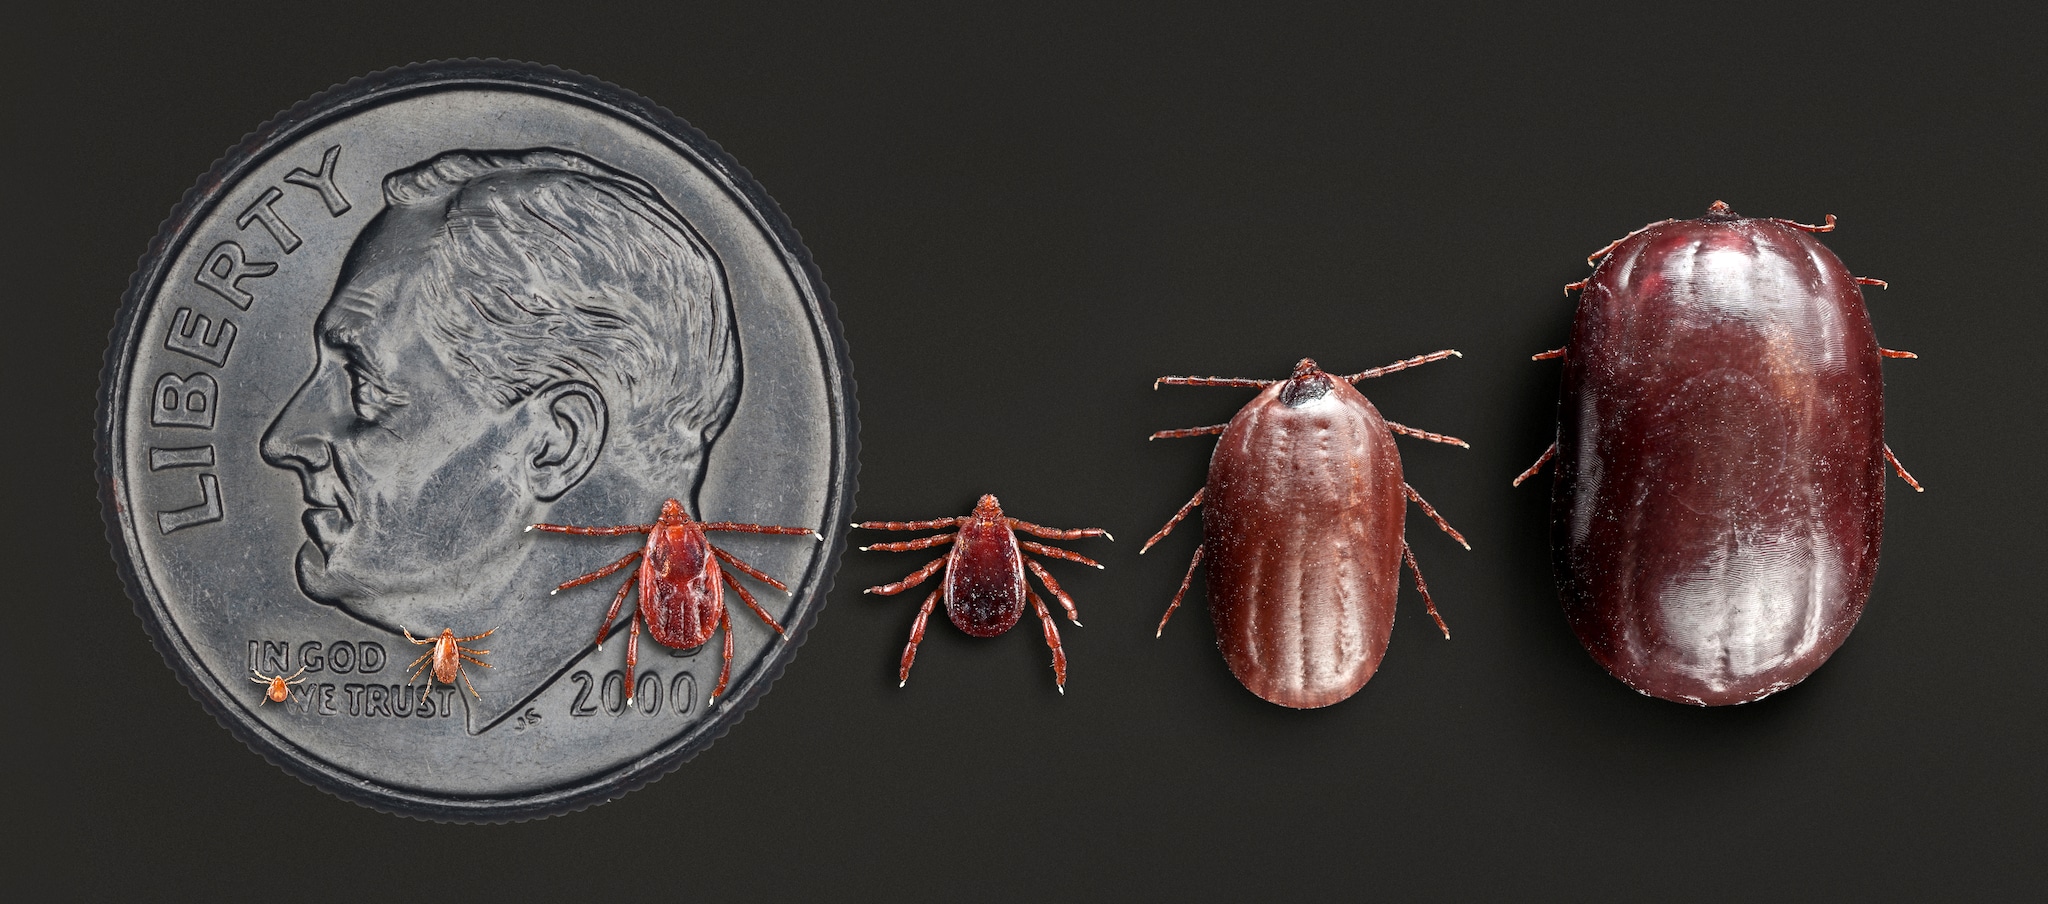 All life stages of Rhipicephalus sanguineus with partially and fully engorged adult females. Dime in background for scale.